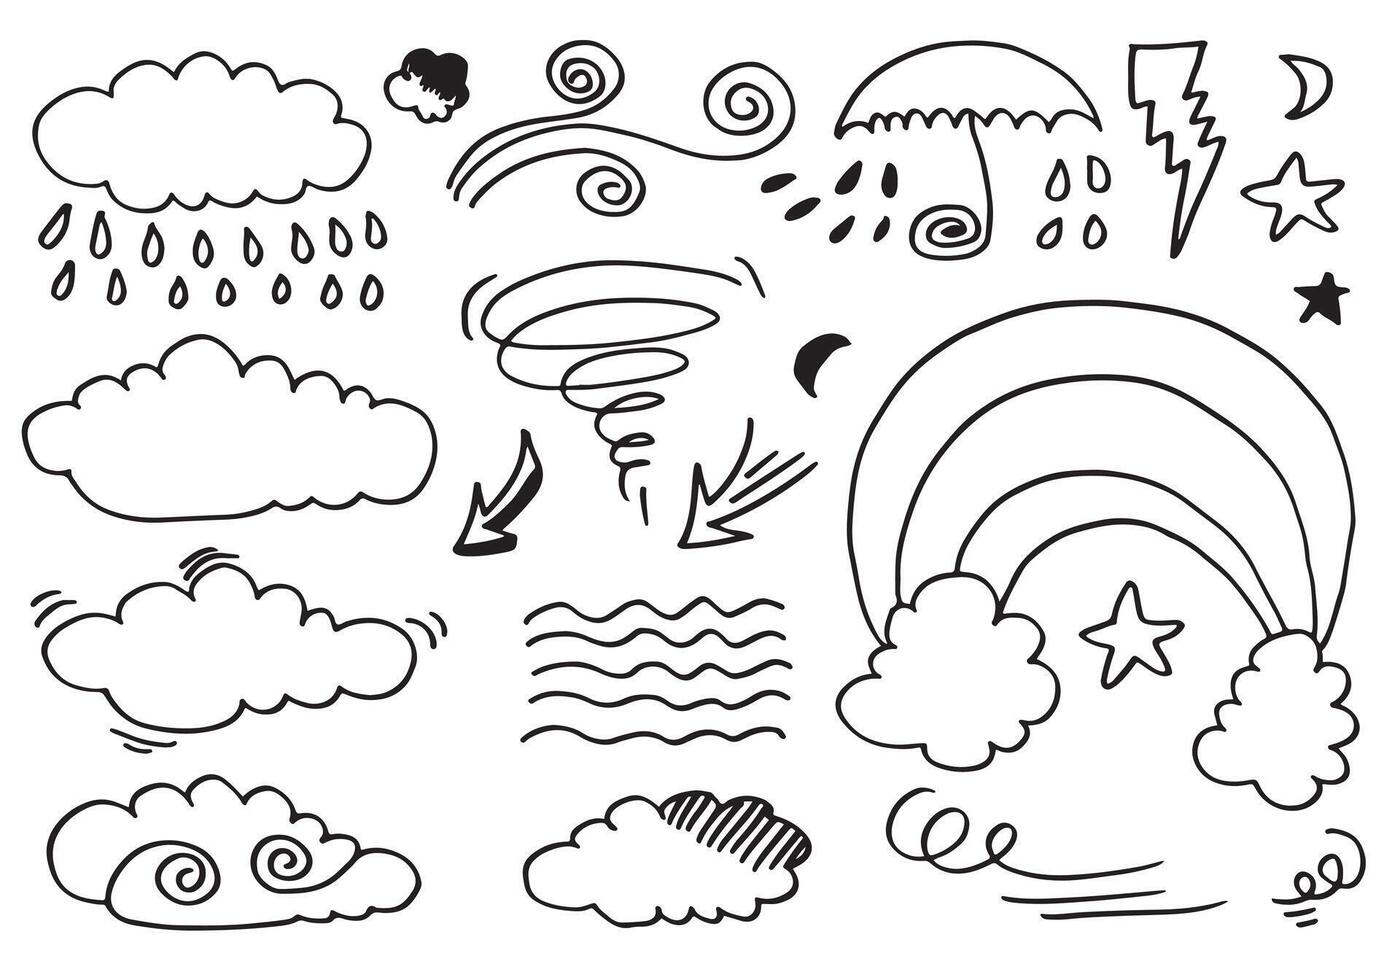 Hand drawn weather collection. vector illustration.